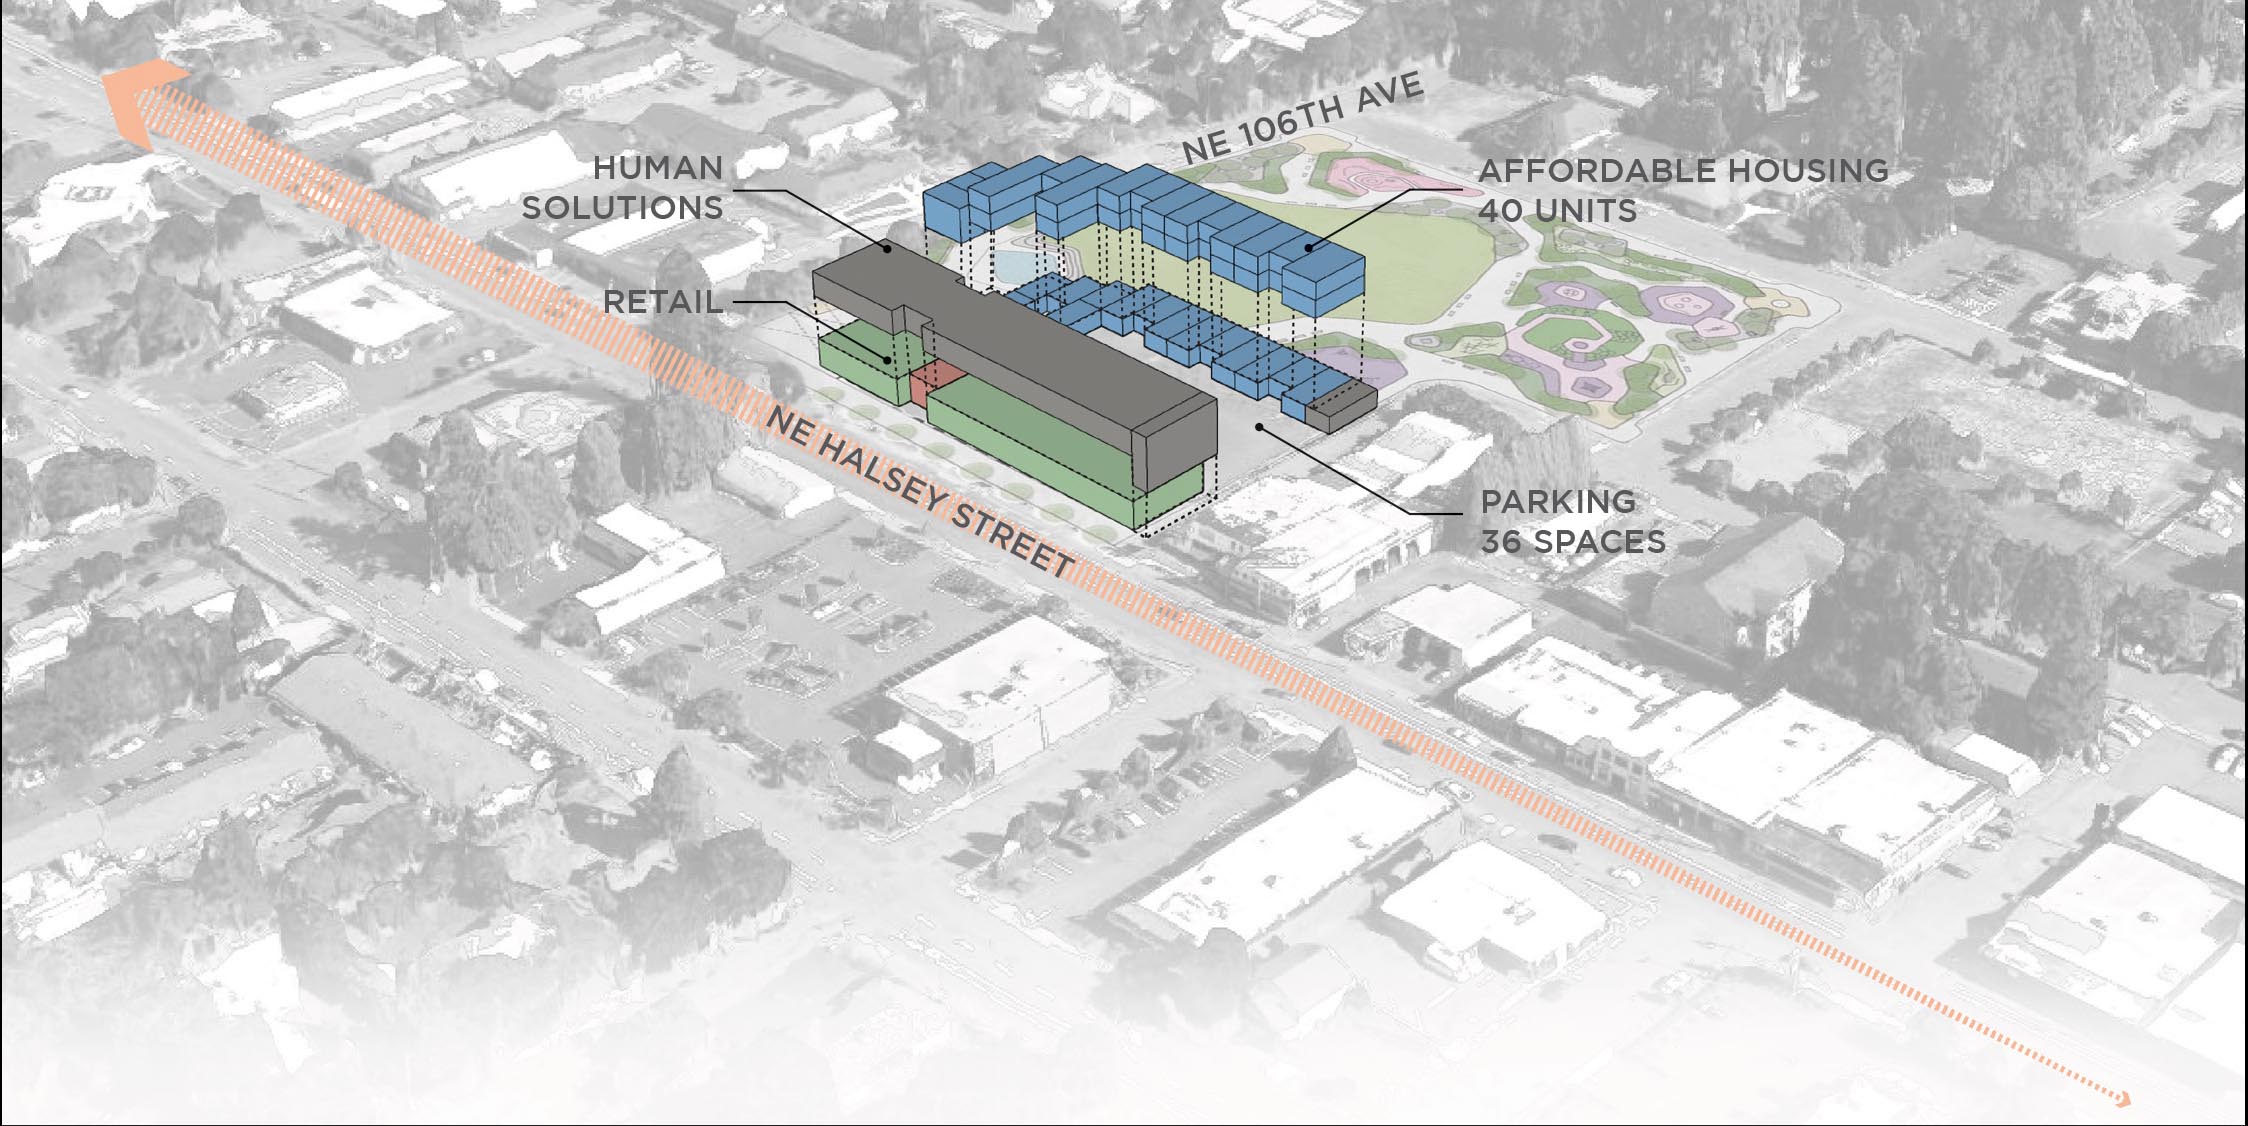 The proposed development at NE 106th & Halsey by Human Solutions, Inc.